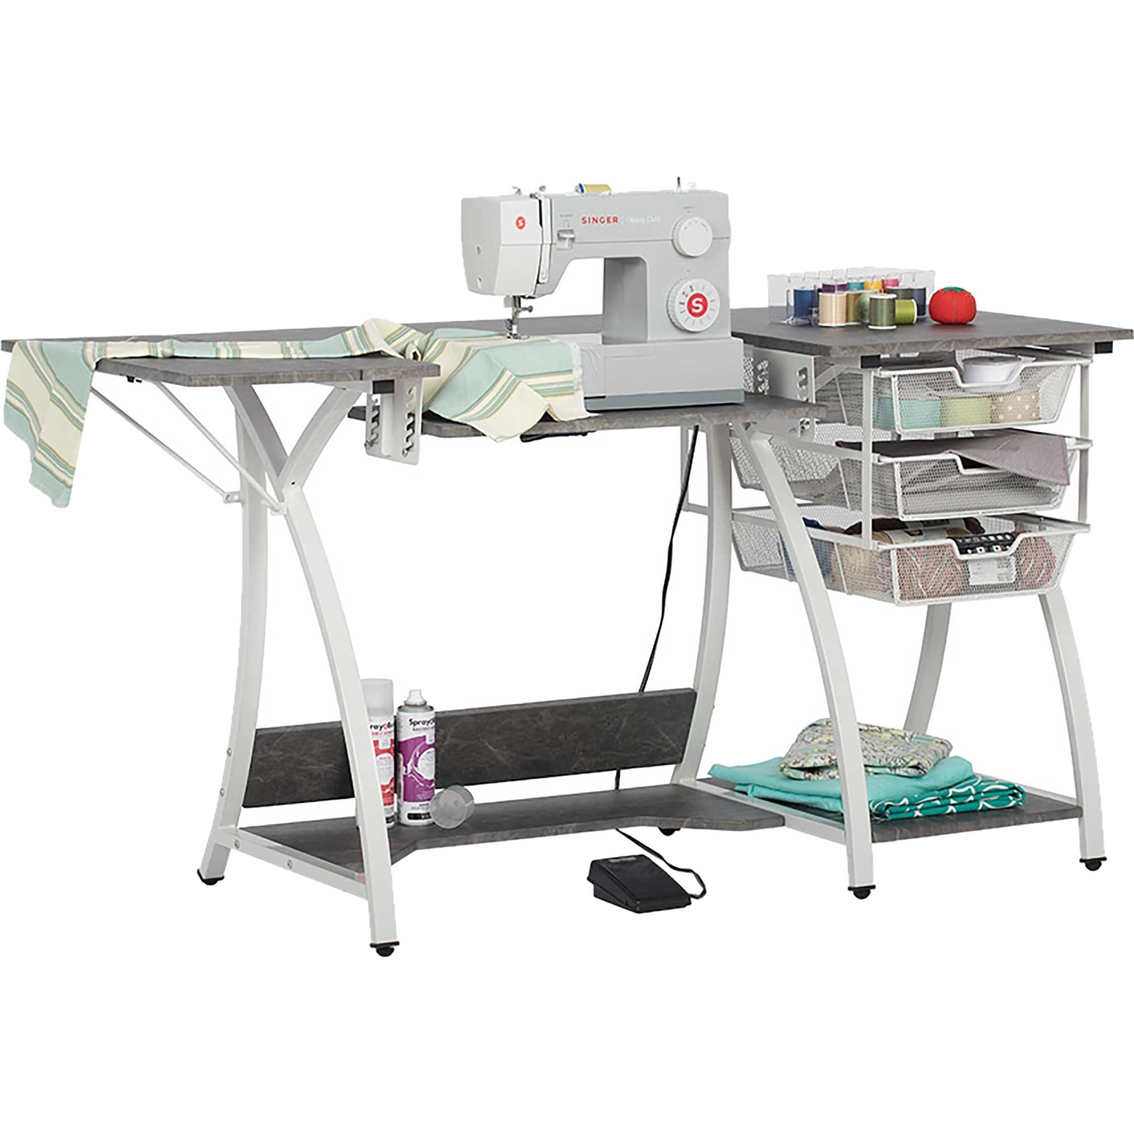 Sew Ready Pro Stitch Sewing Table - Image 7 of 8